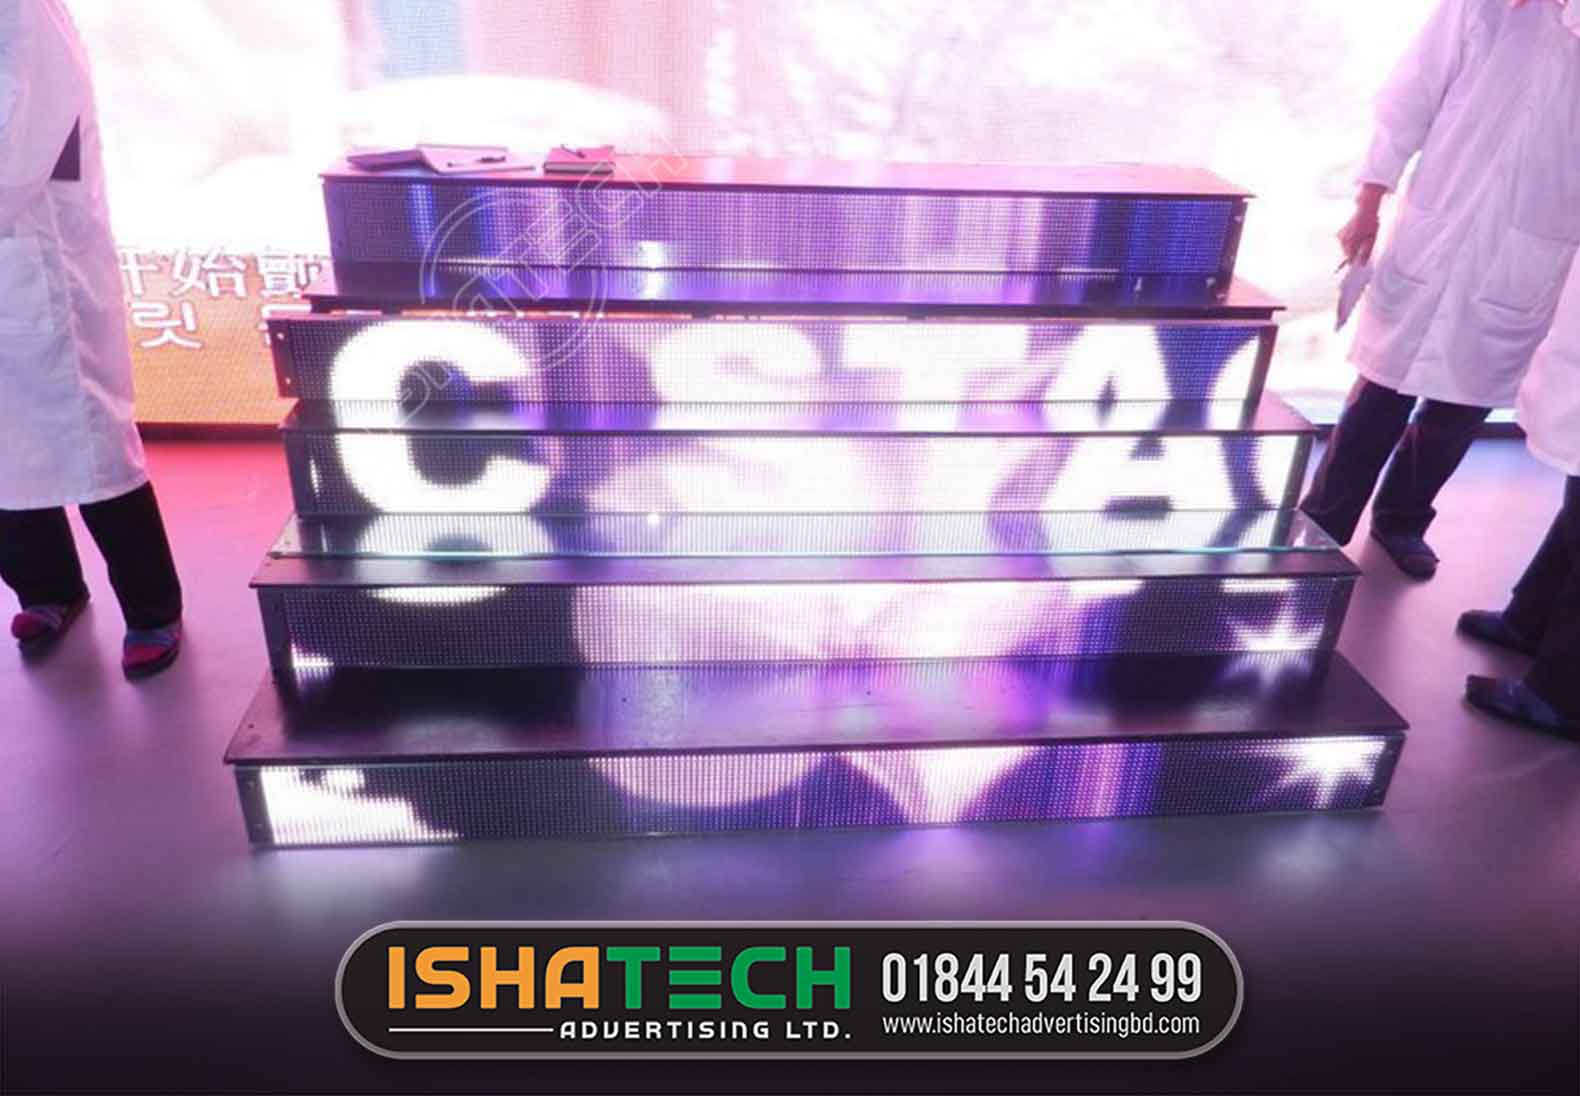 ISHATECH ADVERTISING LTD | Led Screen, Led Display, China Led Video Wall Supplier ; Opens a new tab Magic Stage led screen used as dance floor | LED STAIR TV ADVERTISING BILLBOARD BD